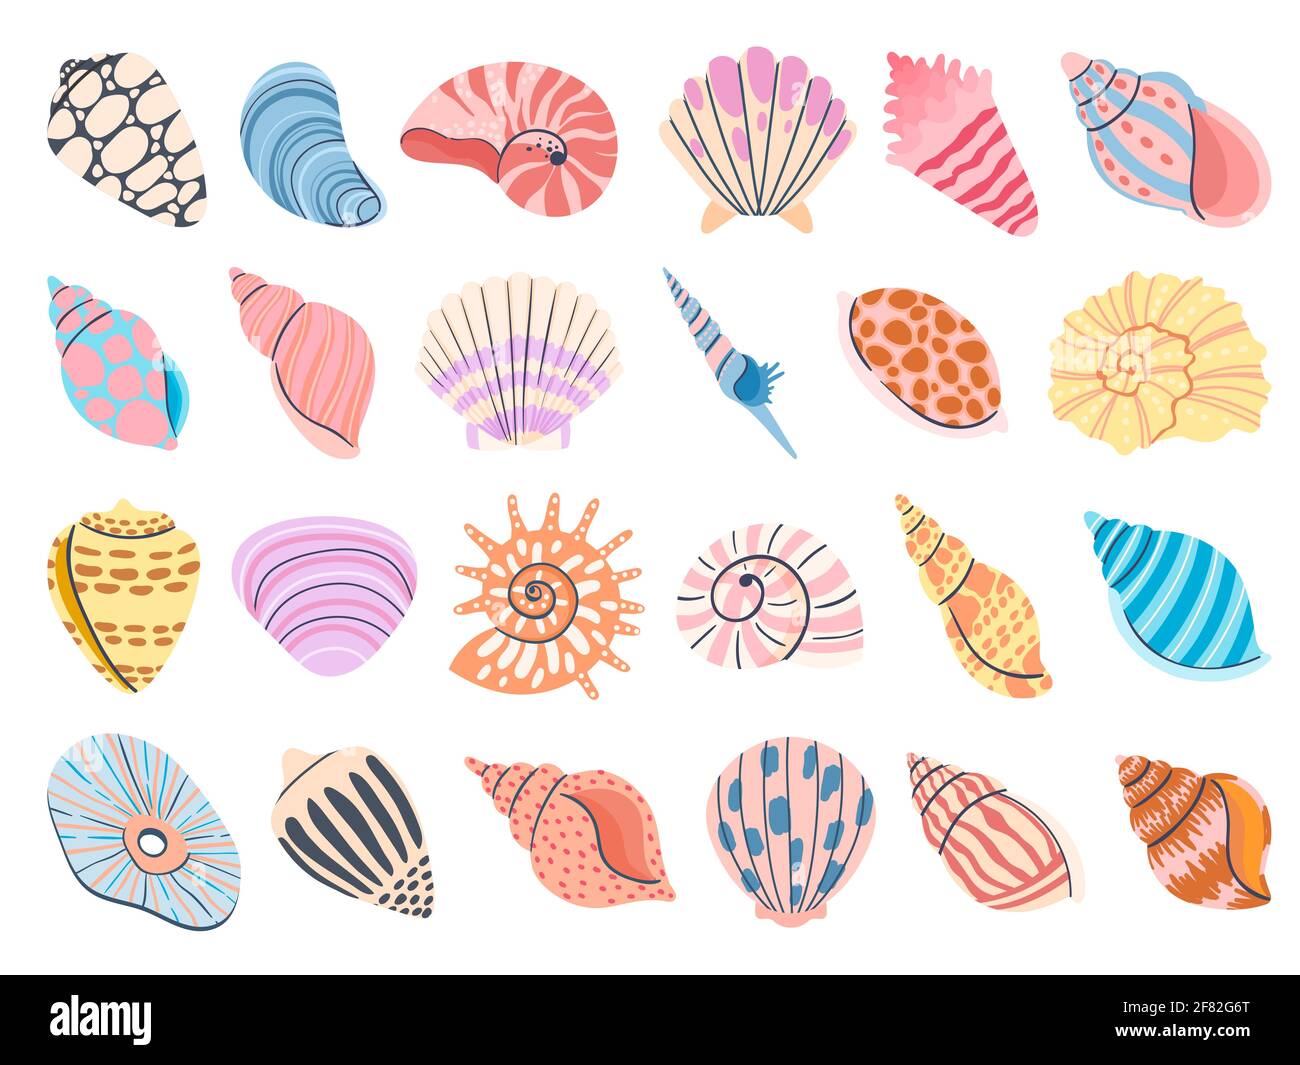 Tropical seashell. Cartoon clam, oyster and scallop shells. Colorful underwater conches of mollusk and sea snail. Ocean shellfish vector set Stock Vector